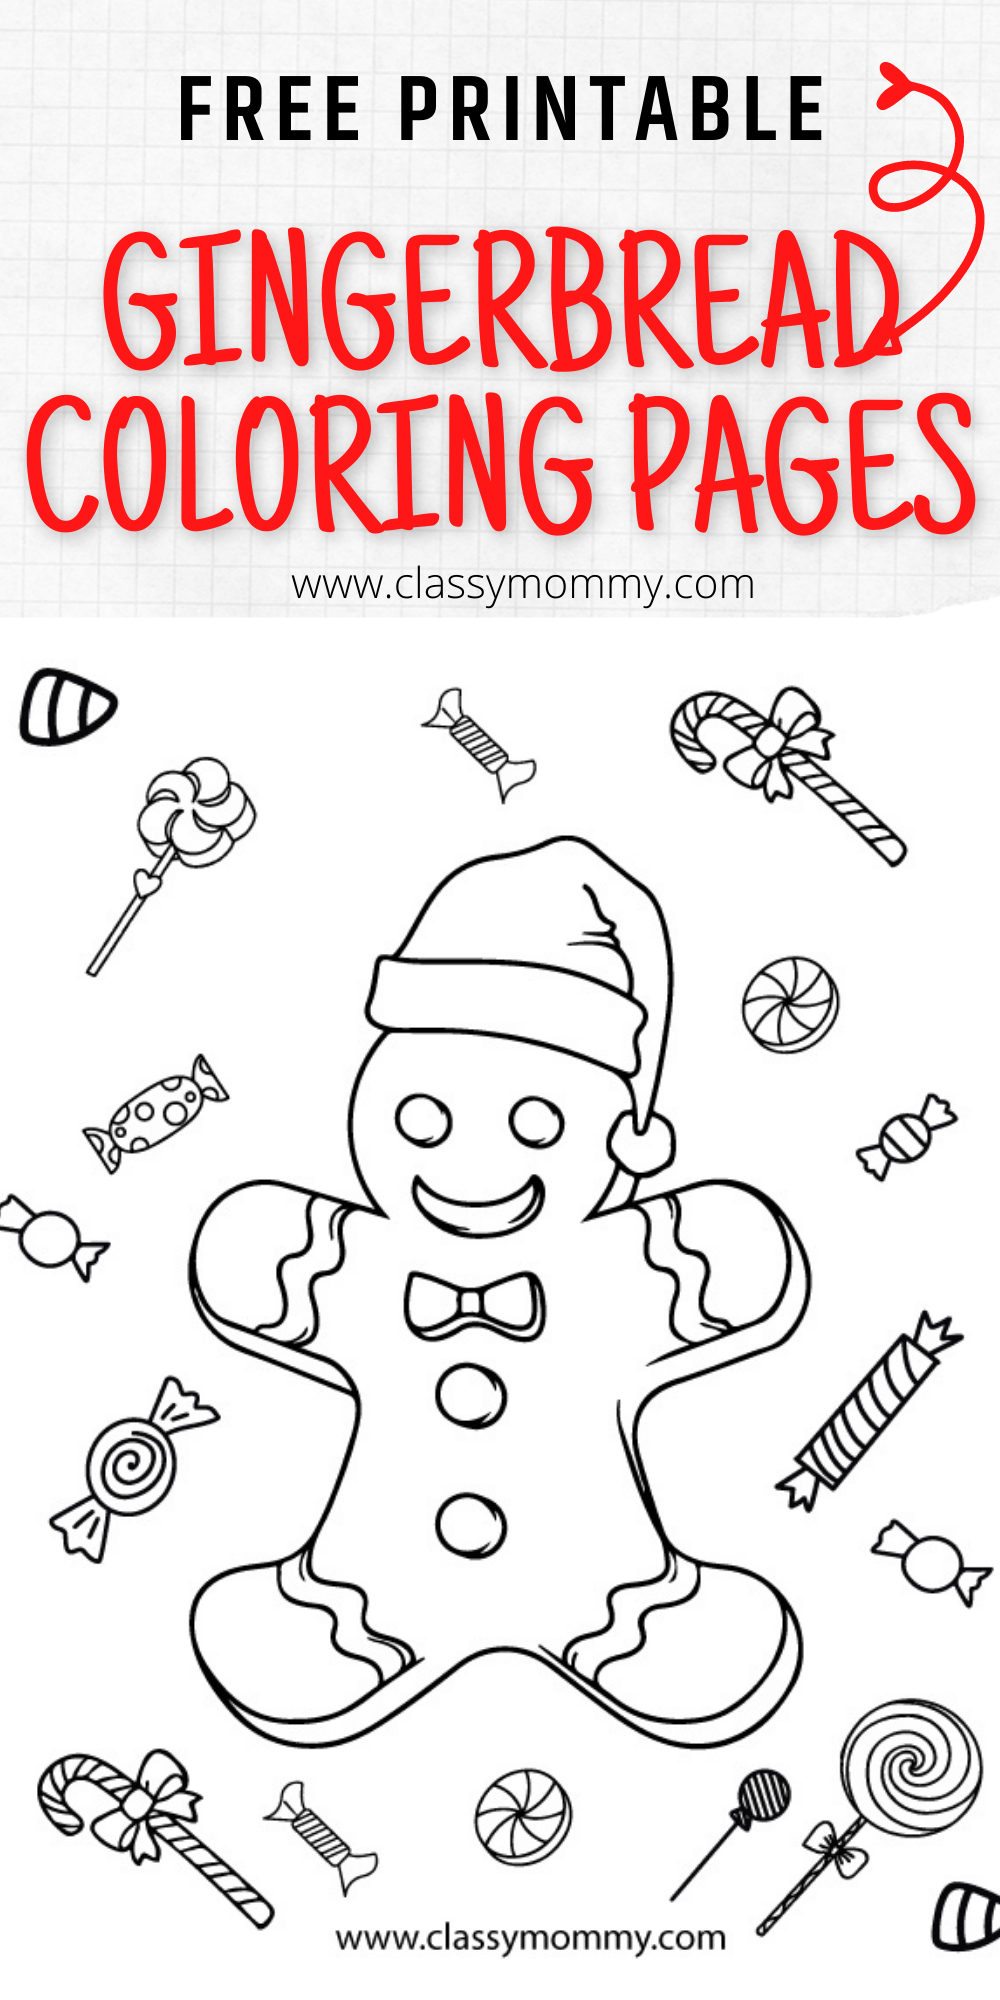 Free Printable Gingerbread Coloring Pages Classy Mommy